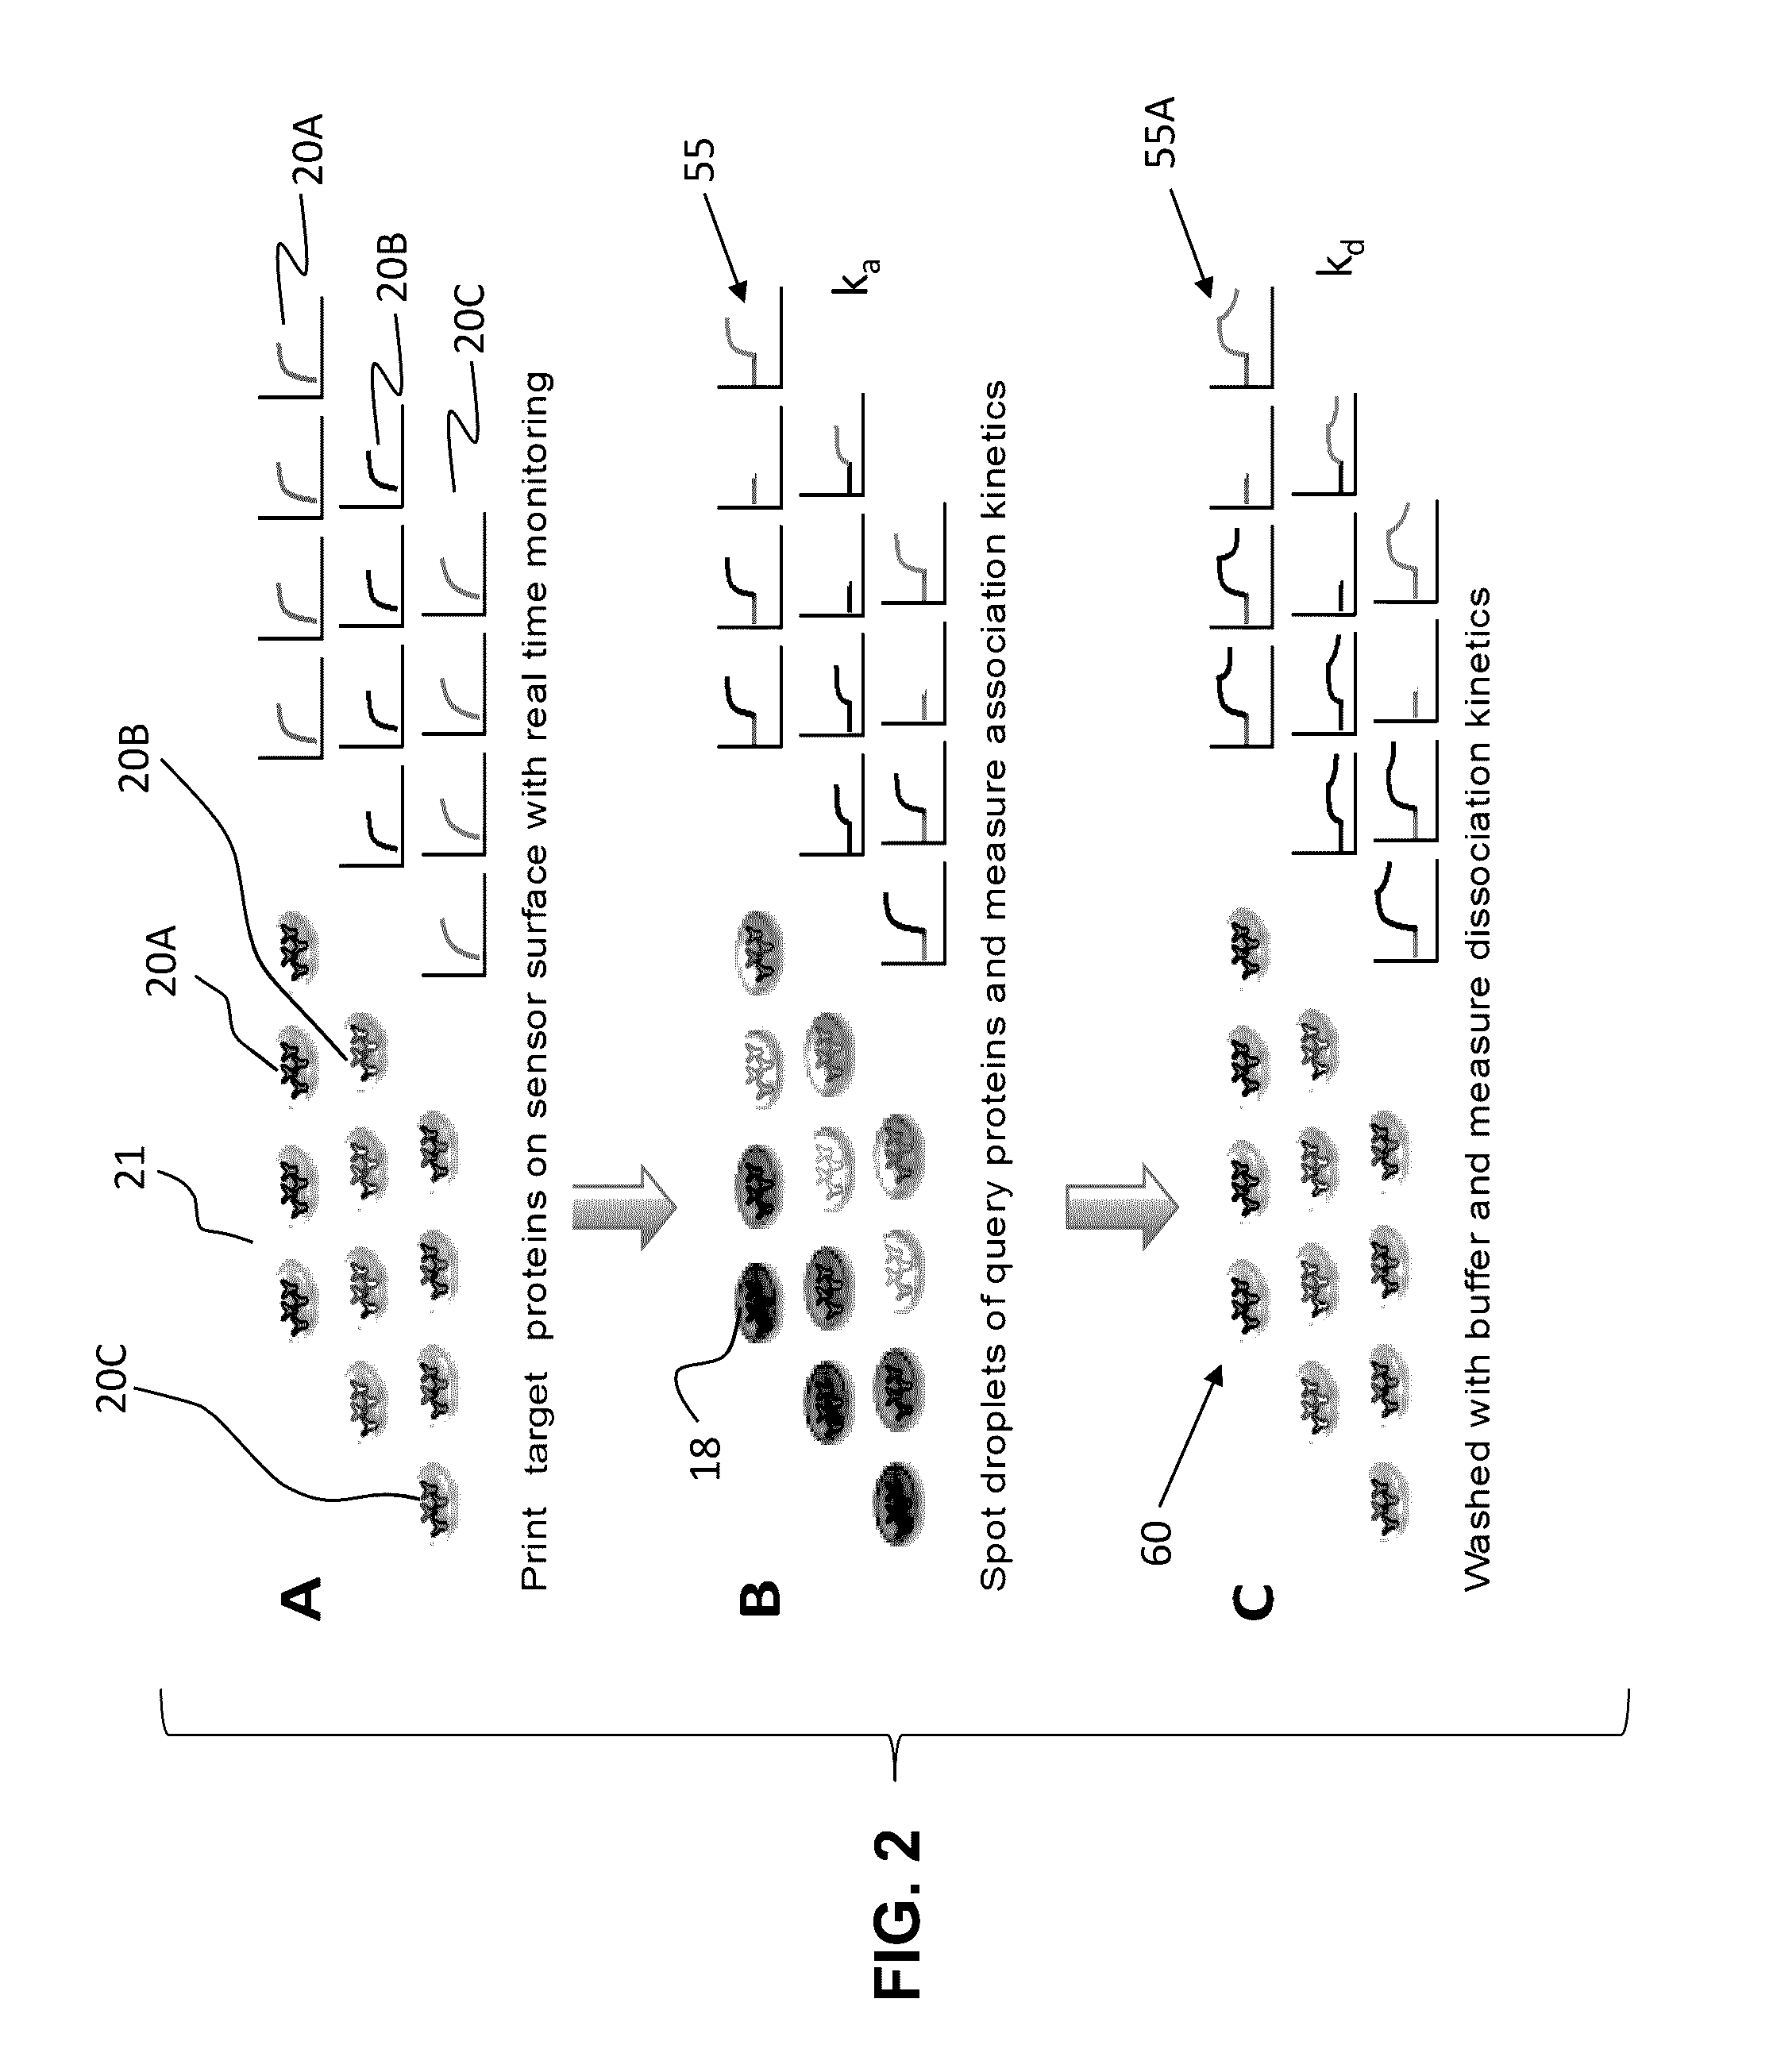 Integrated microarray printing and detection system for molecular binding analysis